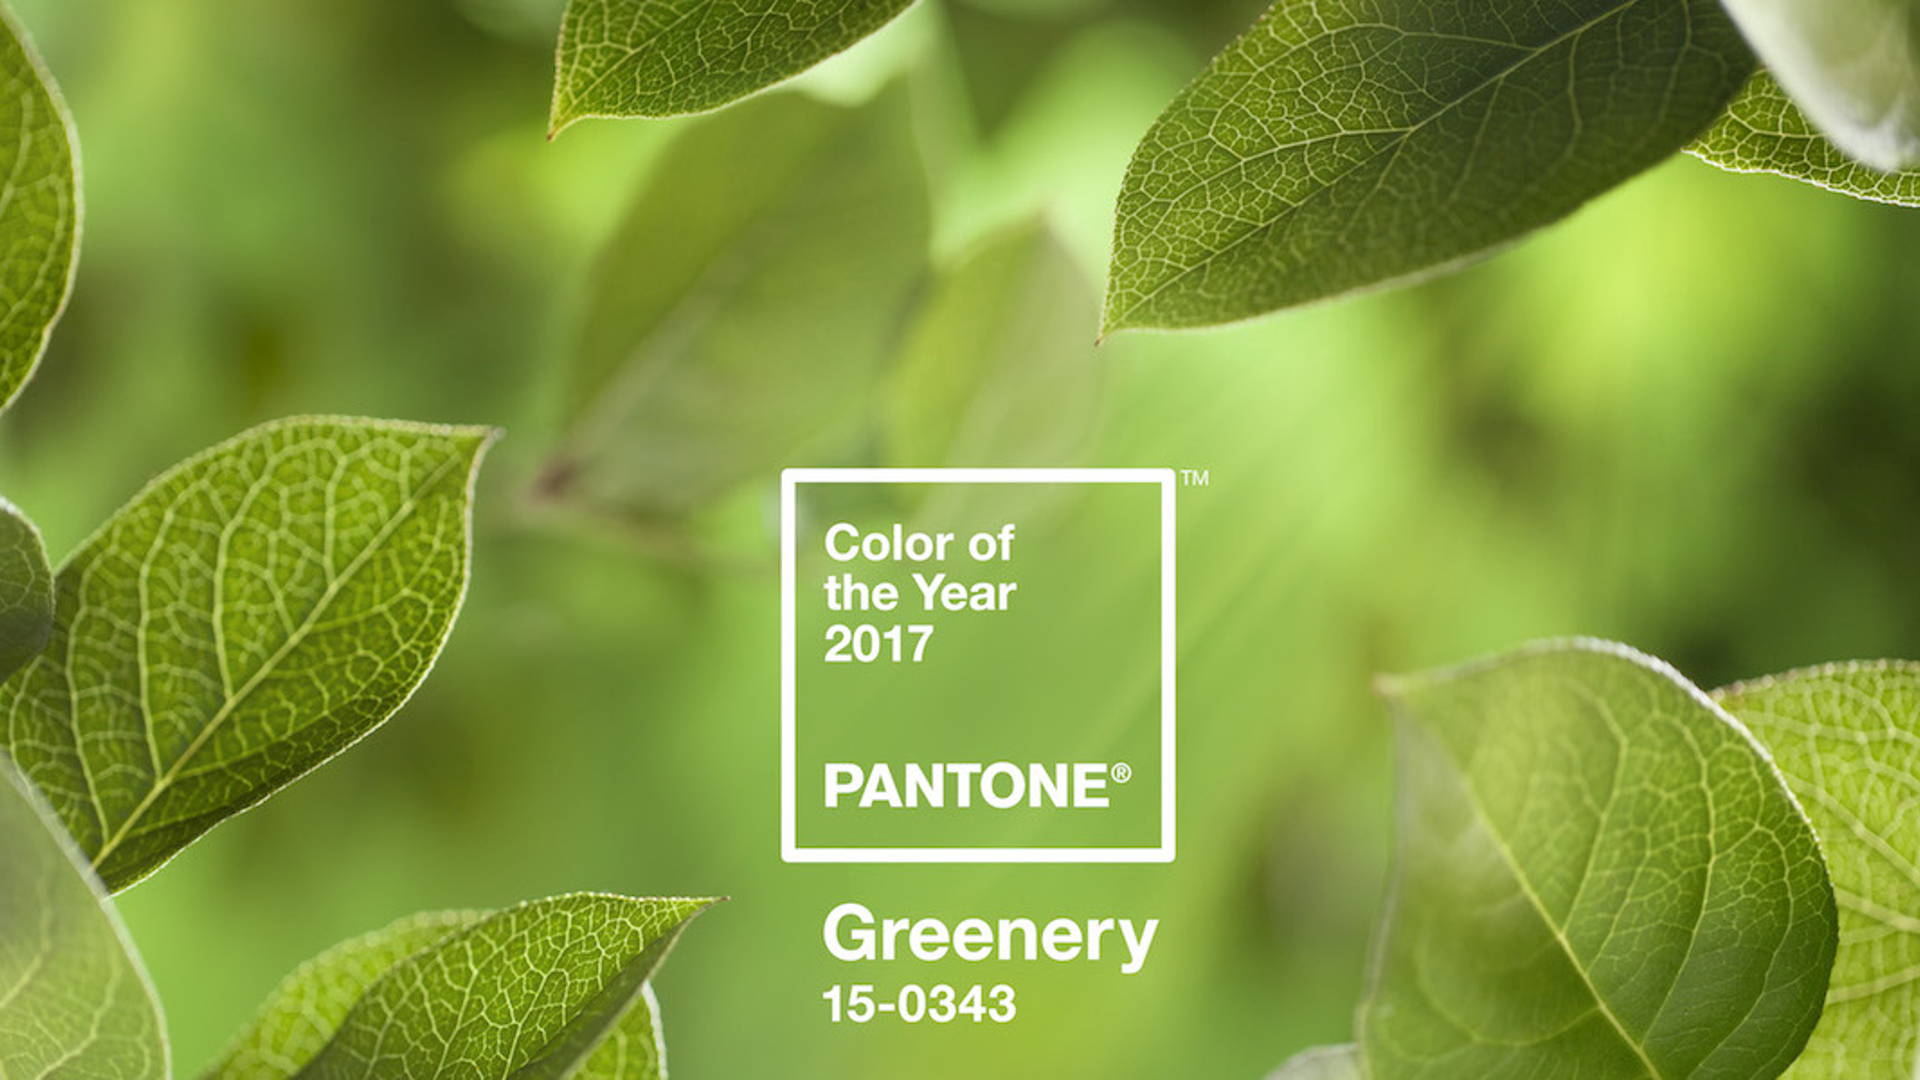 Featured image for Pantone Announces the Color of the Year 2017: Greenery